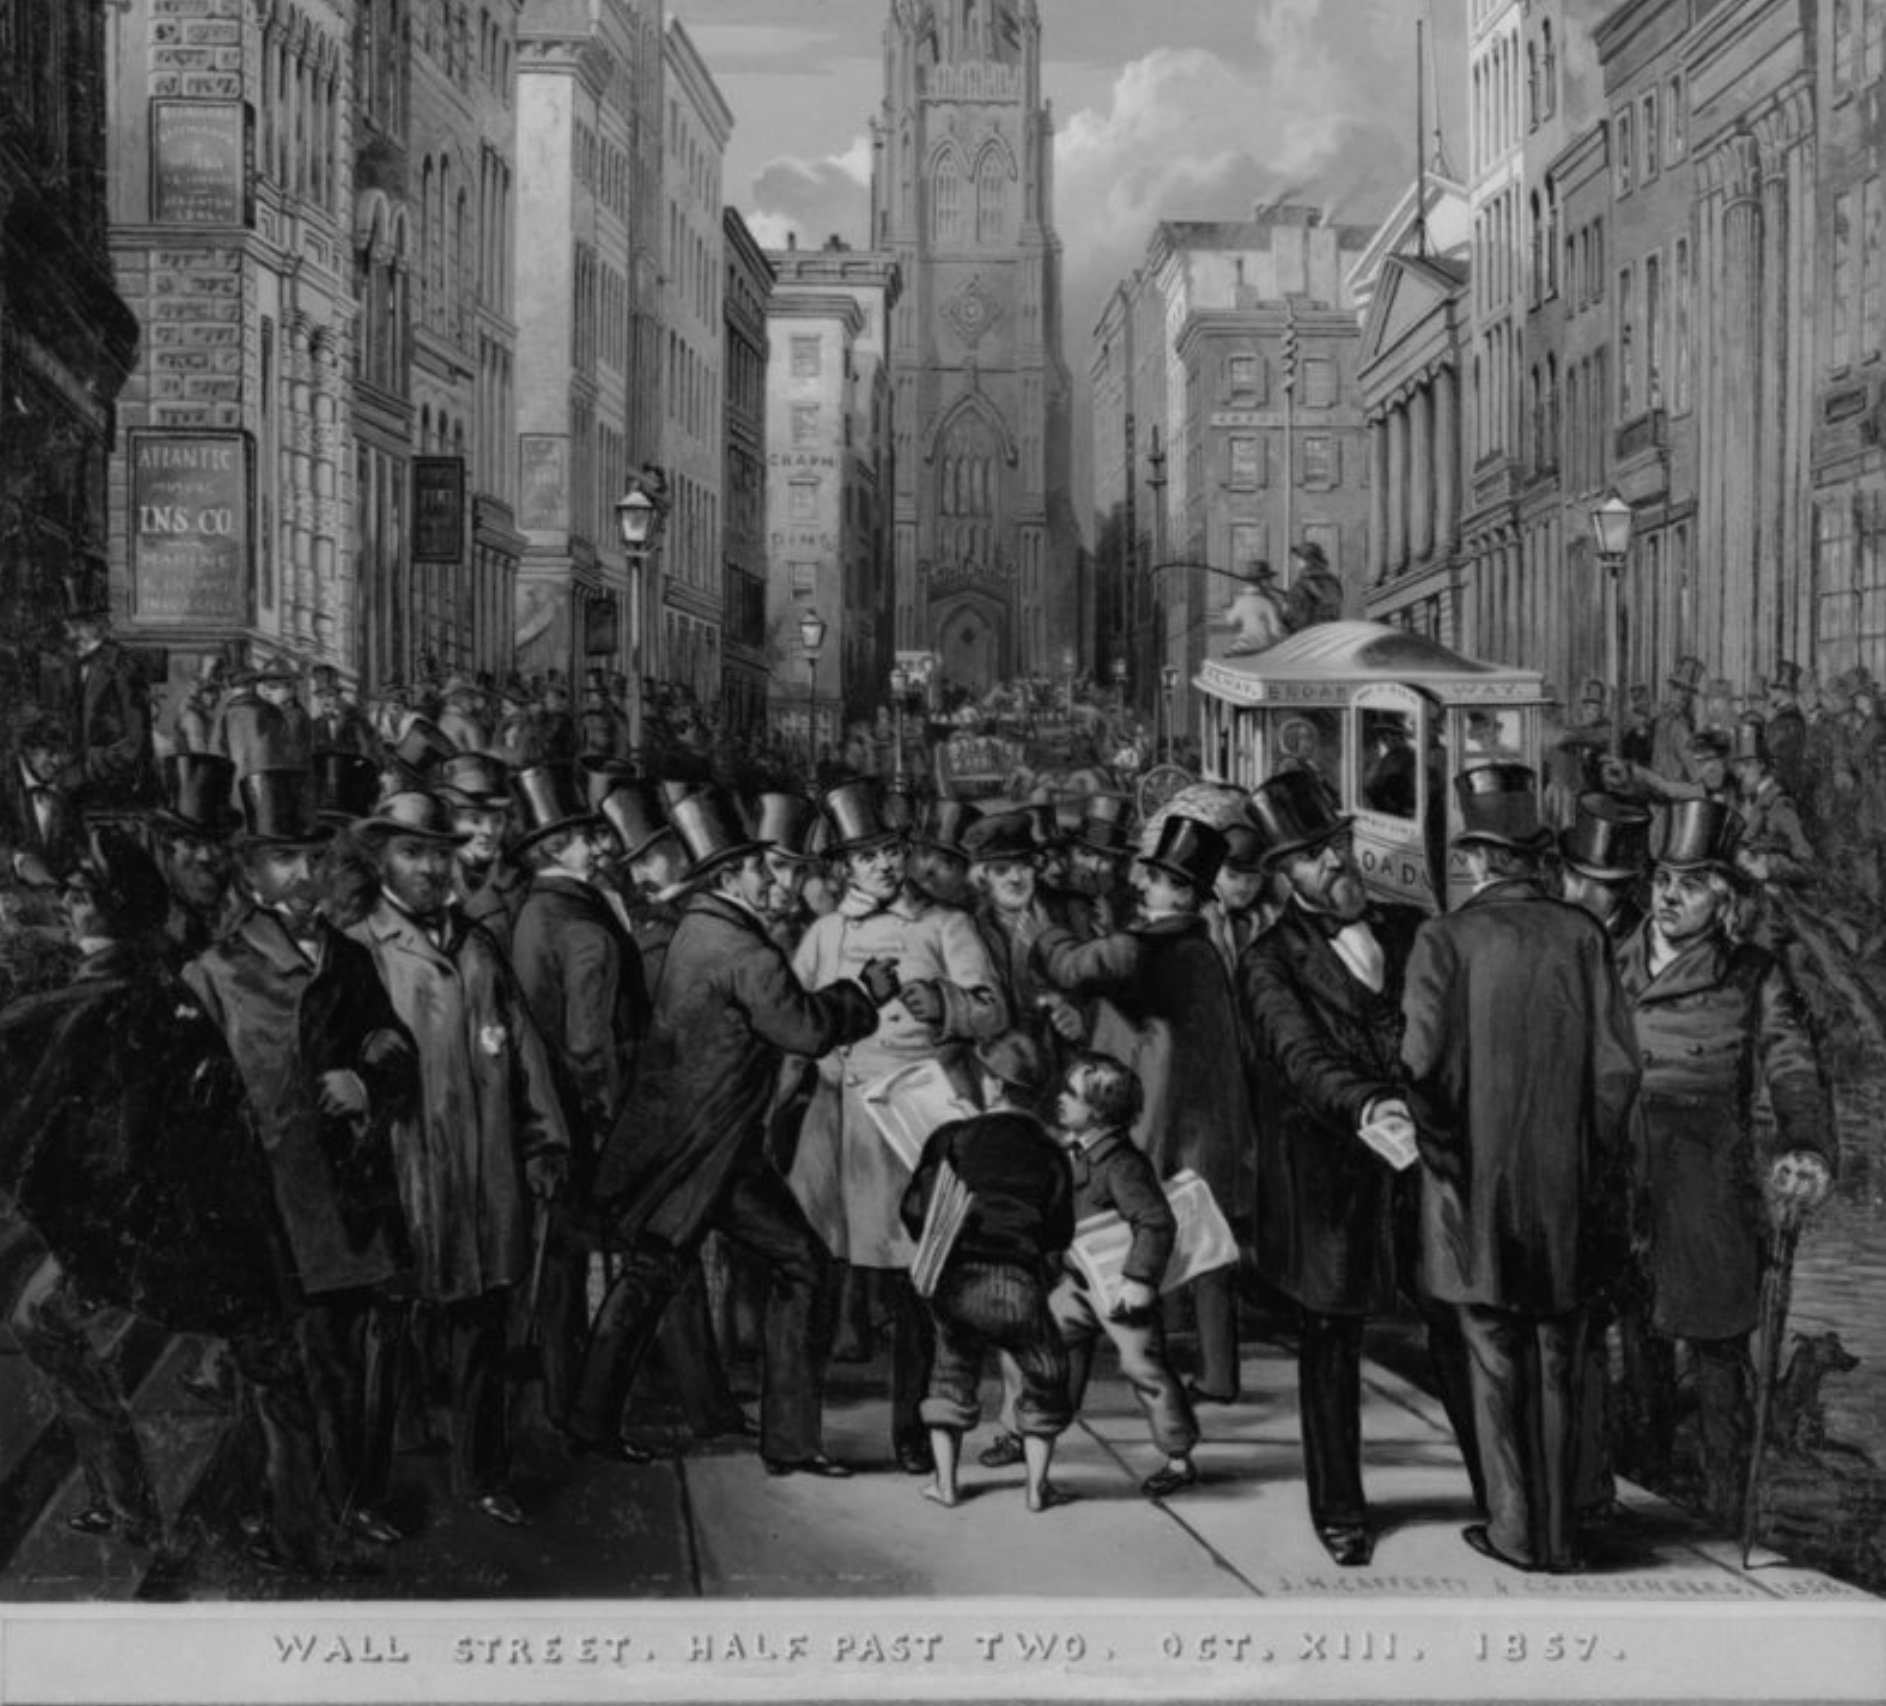 PREVIEW - #IRELAND: #NYC: Excerpt from a two-hour conversation with Professor Tyler Anbinder, author of the rich new book ”PLENTIFUL COUNTRY: The Great Potato Famine and the Making of Irish New York” 